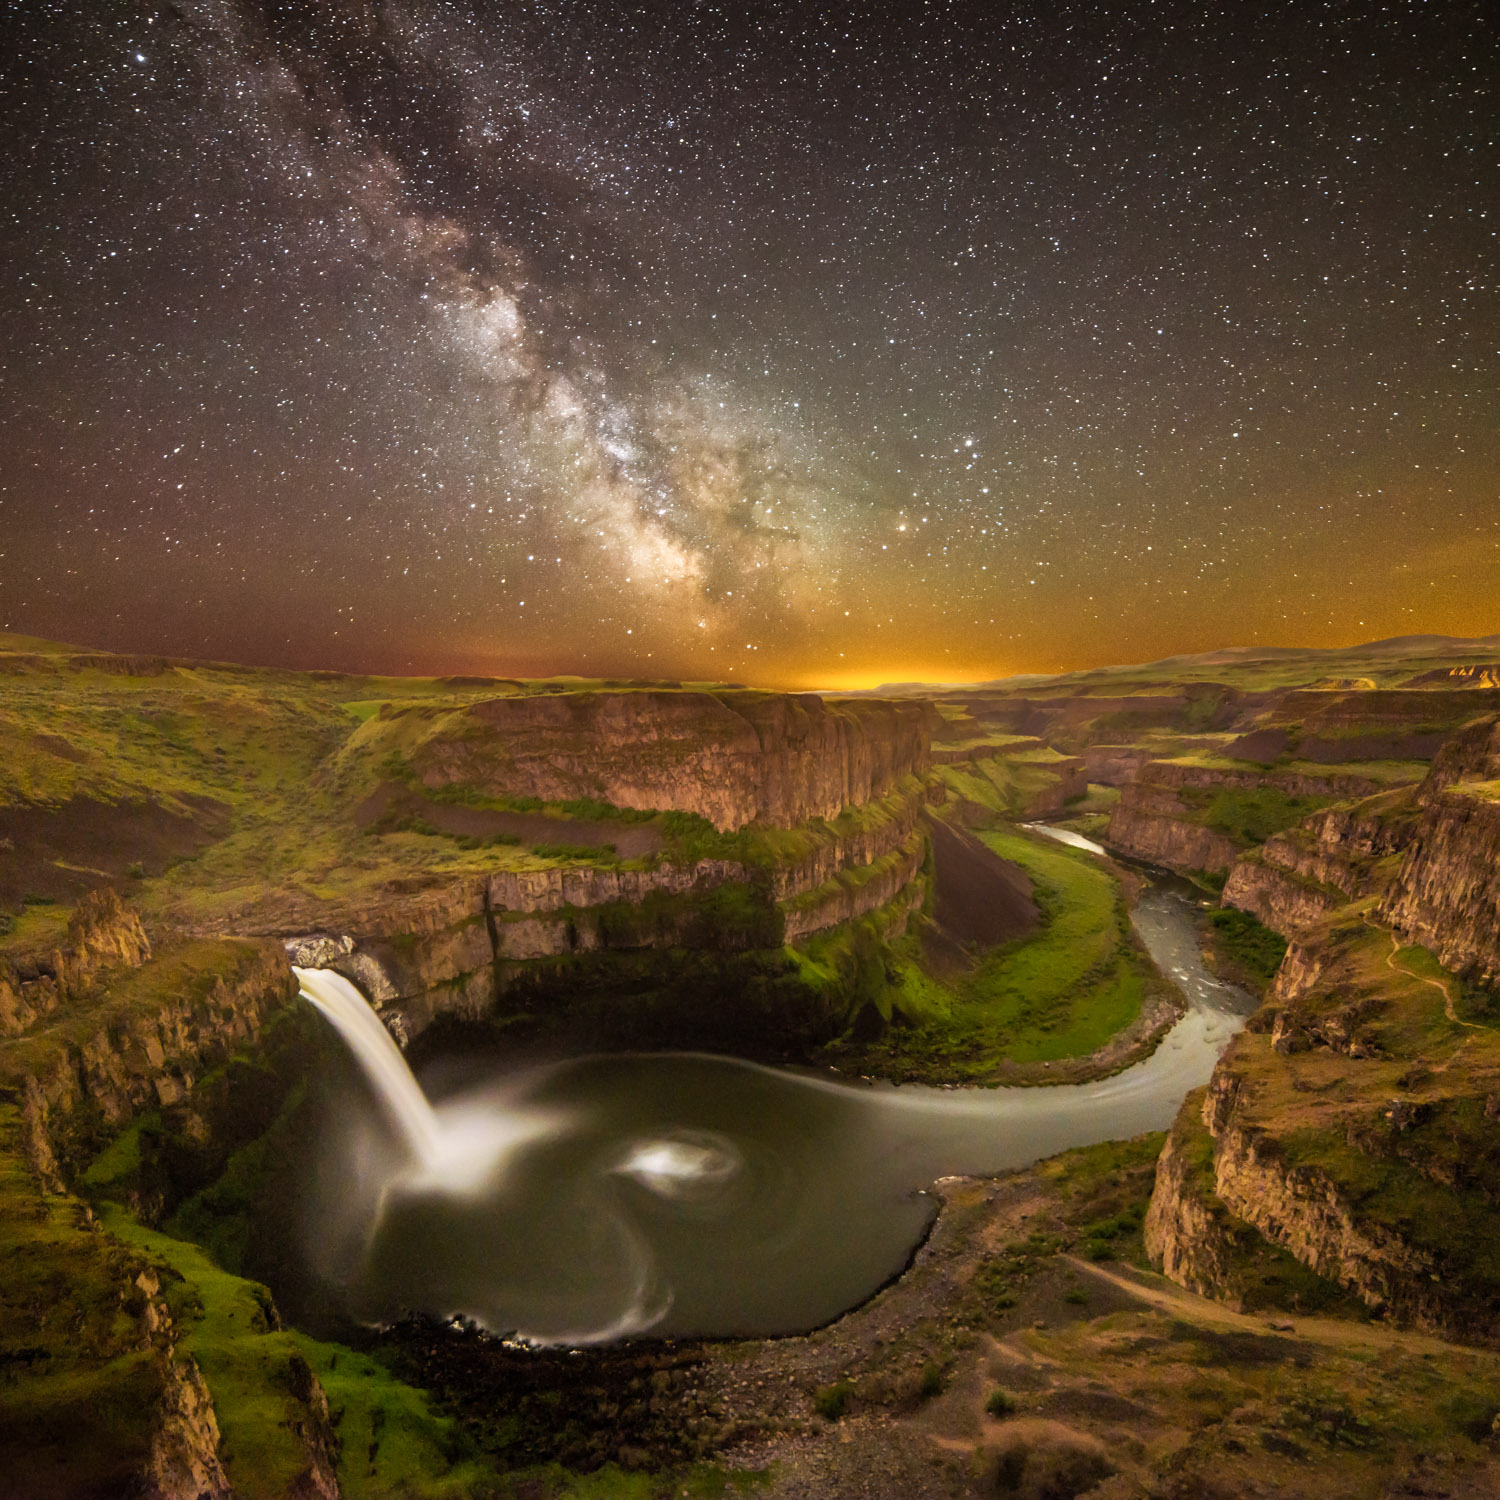 Palouse Falls at night with the Milky Way galaxy in the sky above.